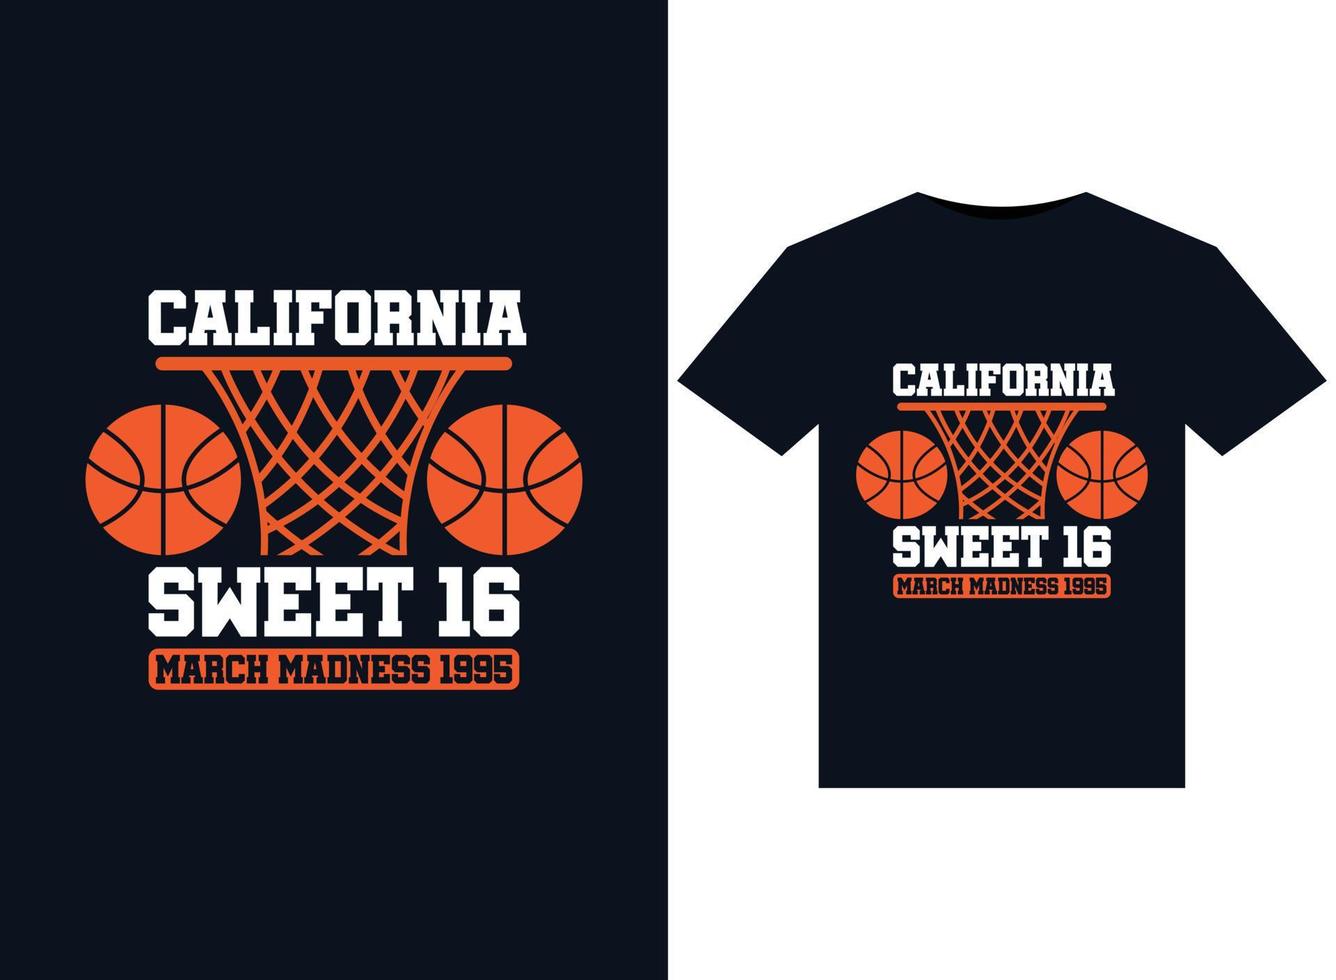 California sweet 16 march madness 1995 illustrations for print-ready T-Shirts design vector